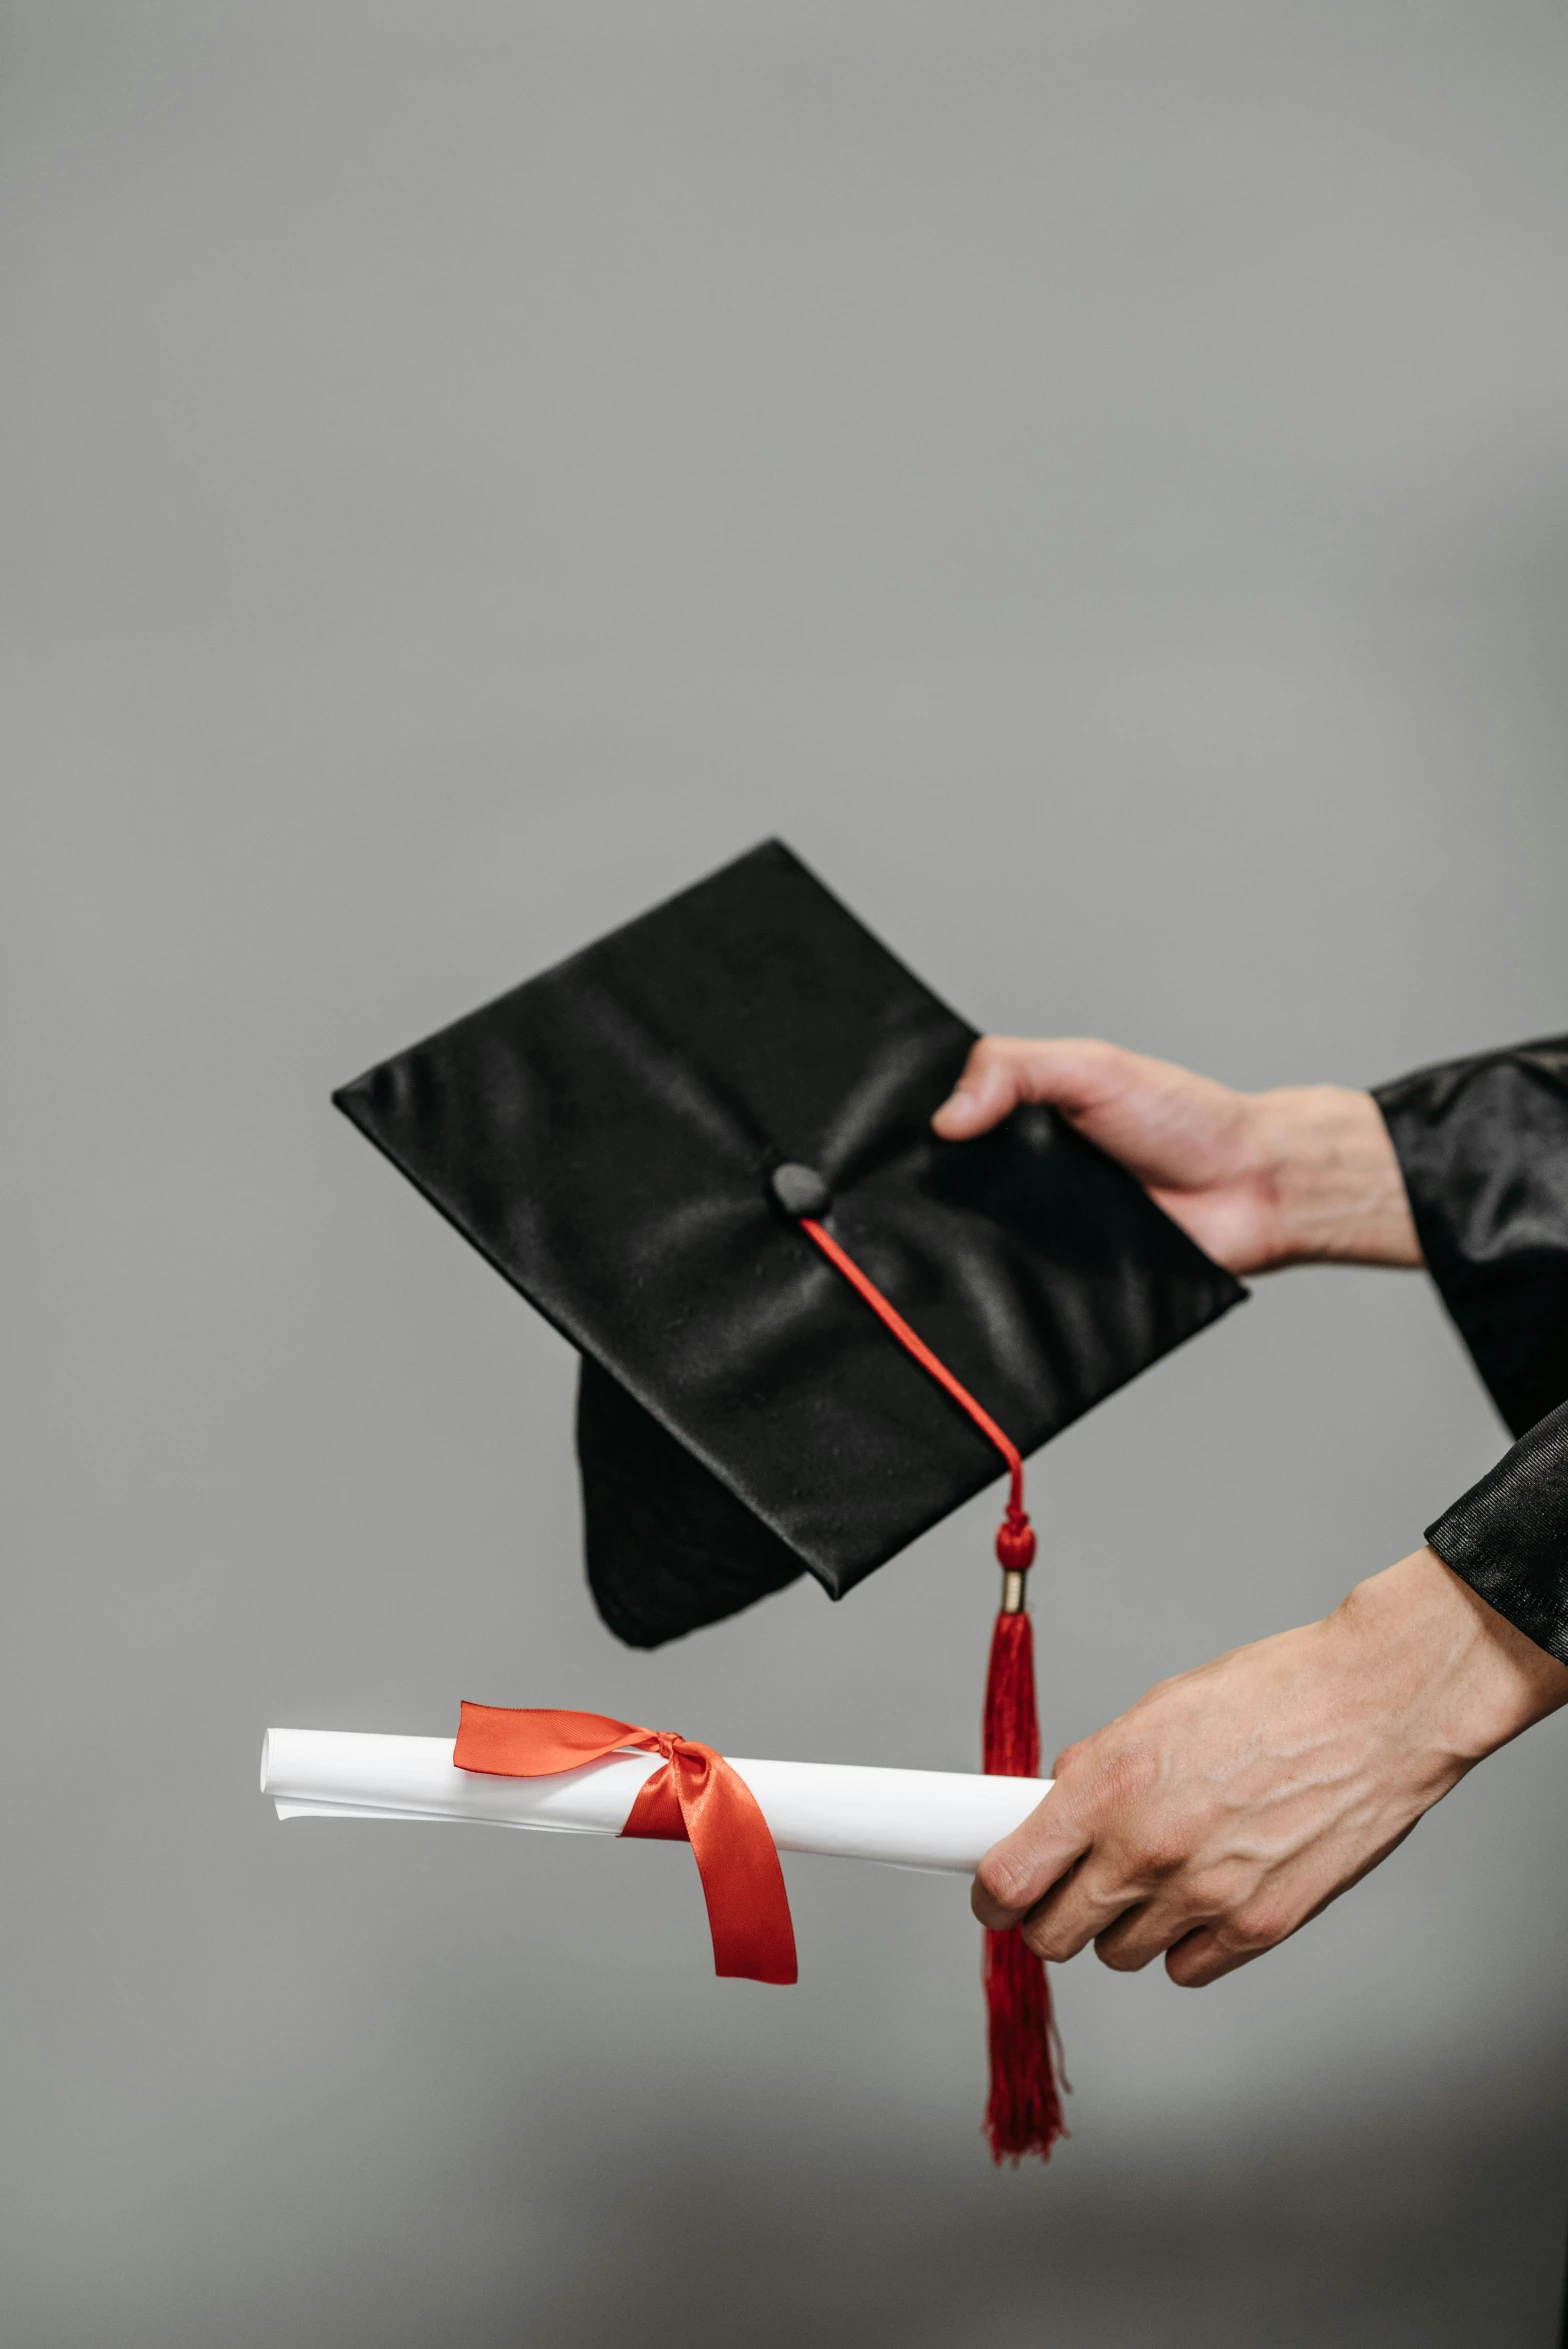 a person holding a graduation cap and diploma, pexels, streamers, low quality photo, inspect in inventory image, black